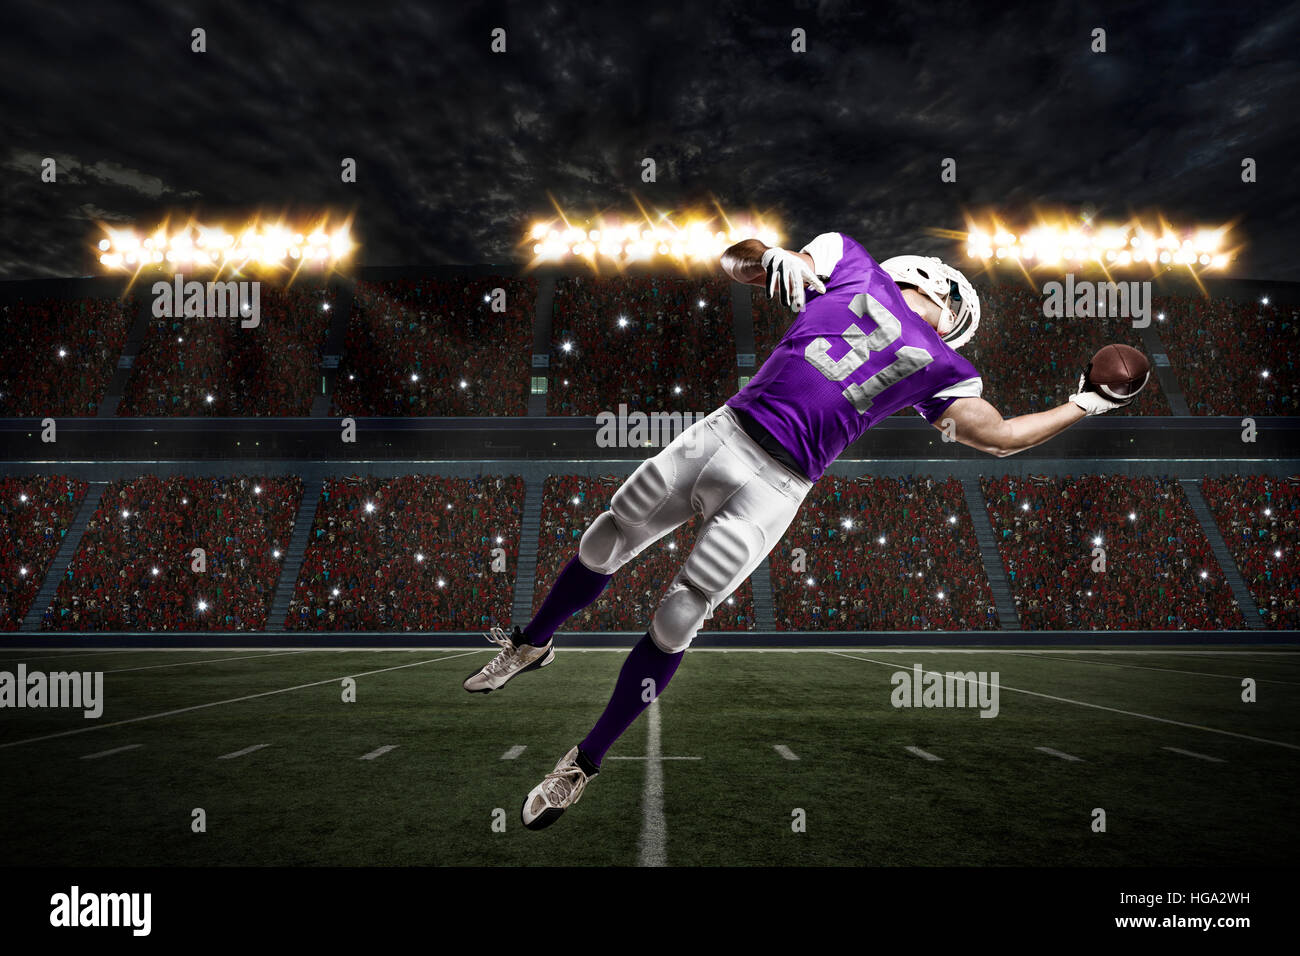 Football Player with a purple uniform catching a ball on a stadium. Stock Photo